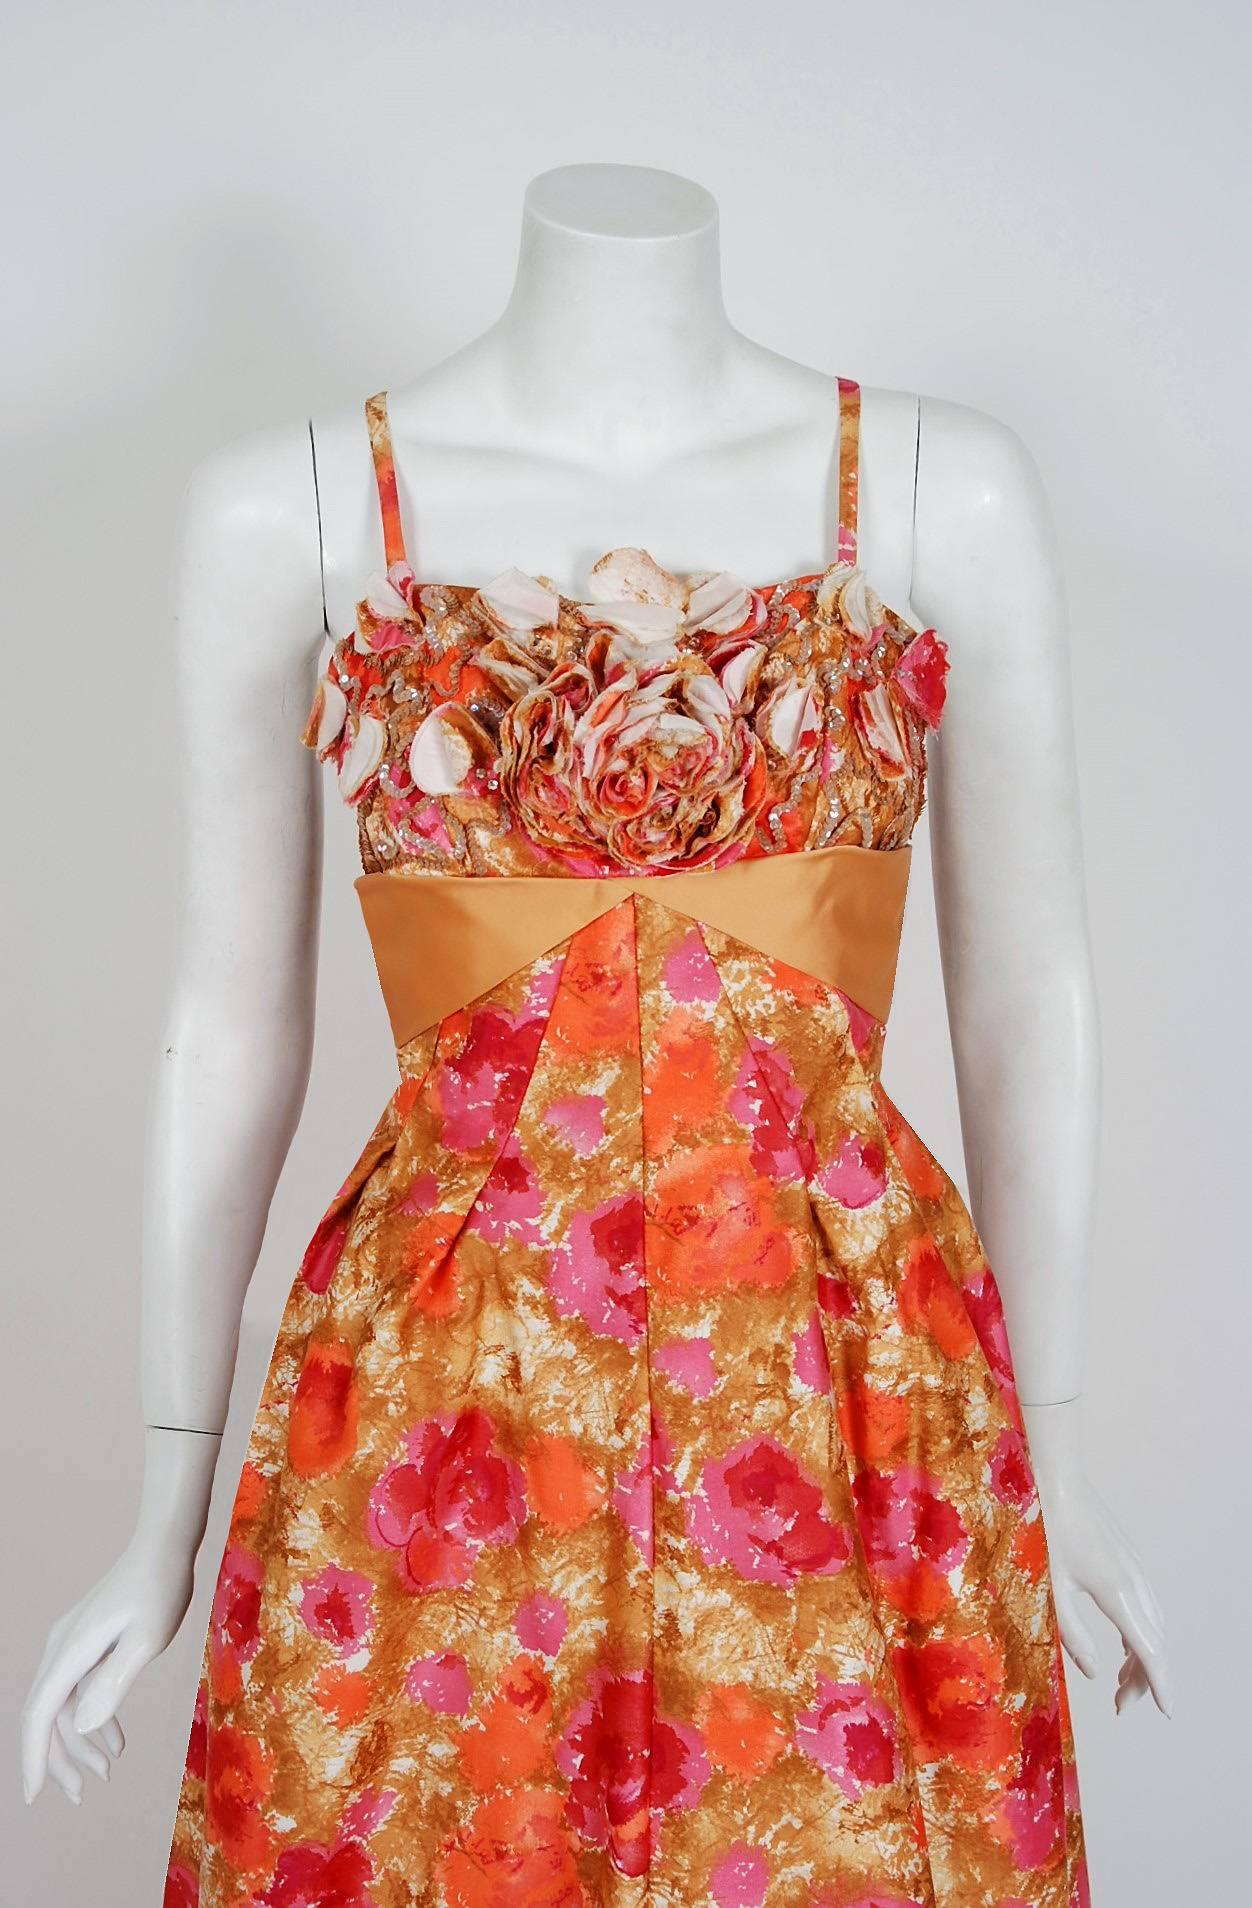 With its vivid rose-garden watercolor floral print and flawless 